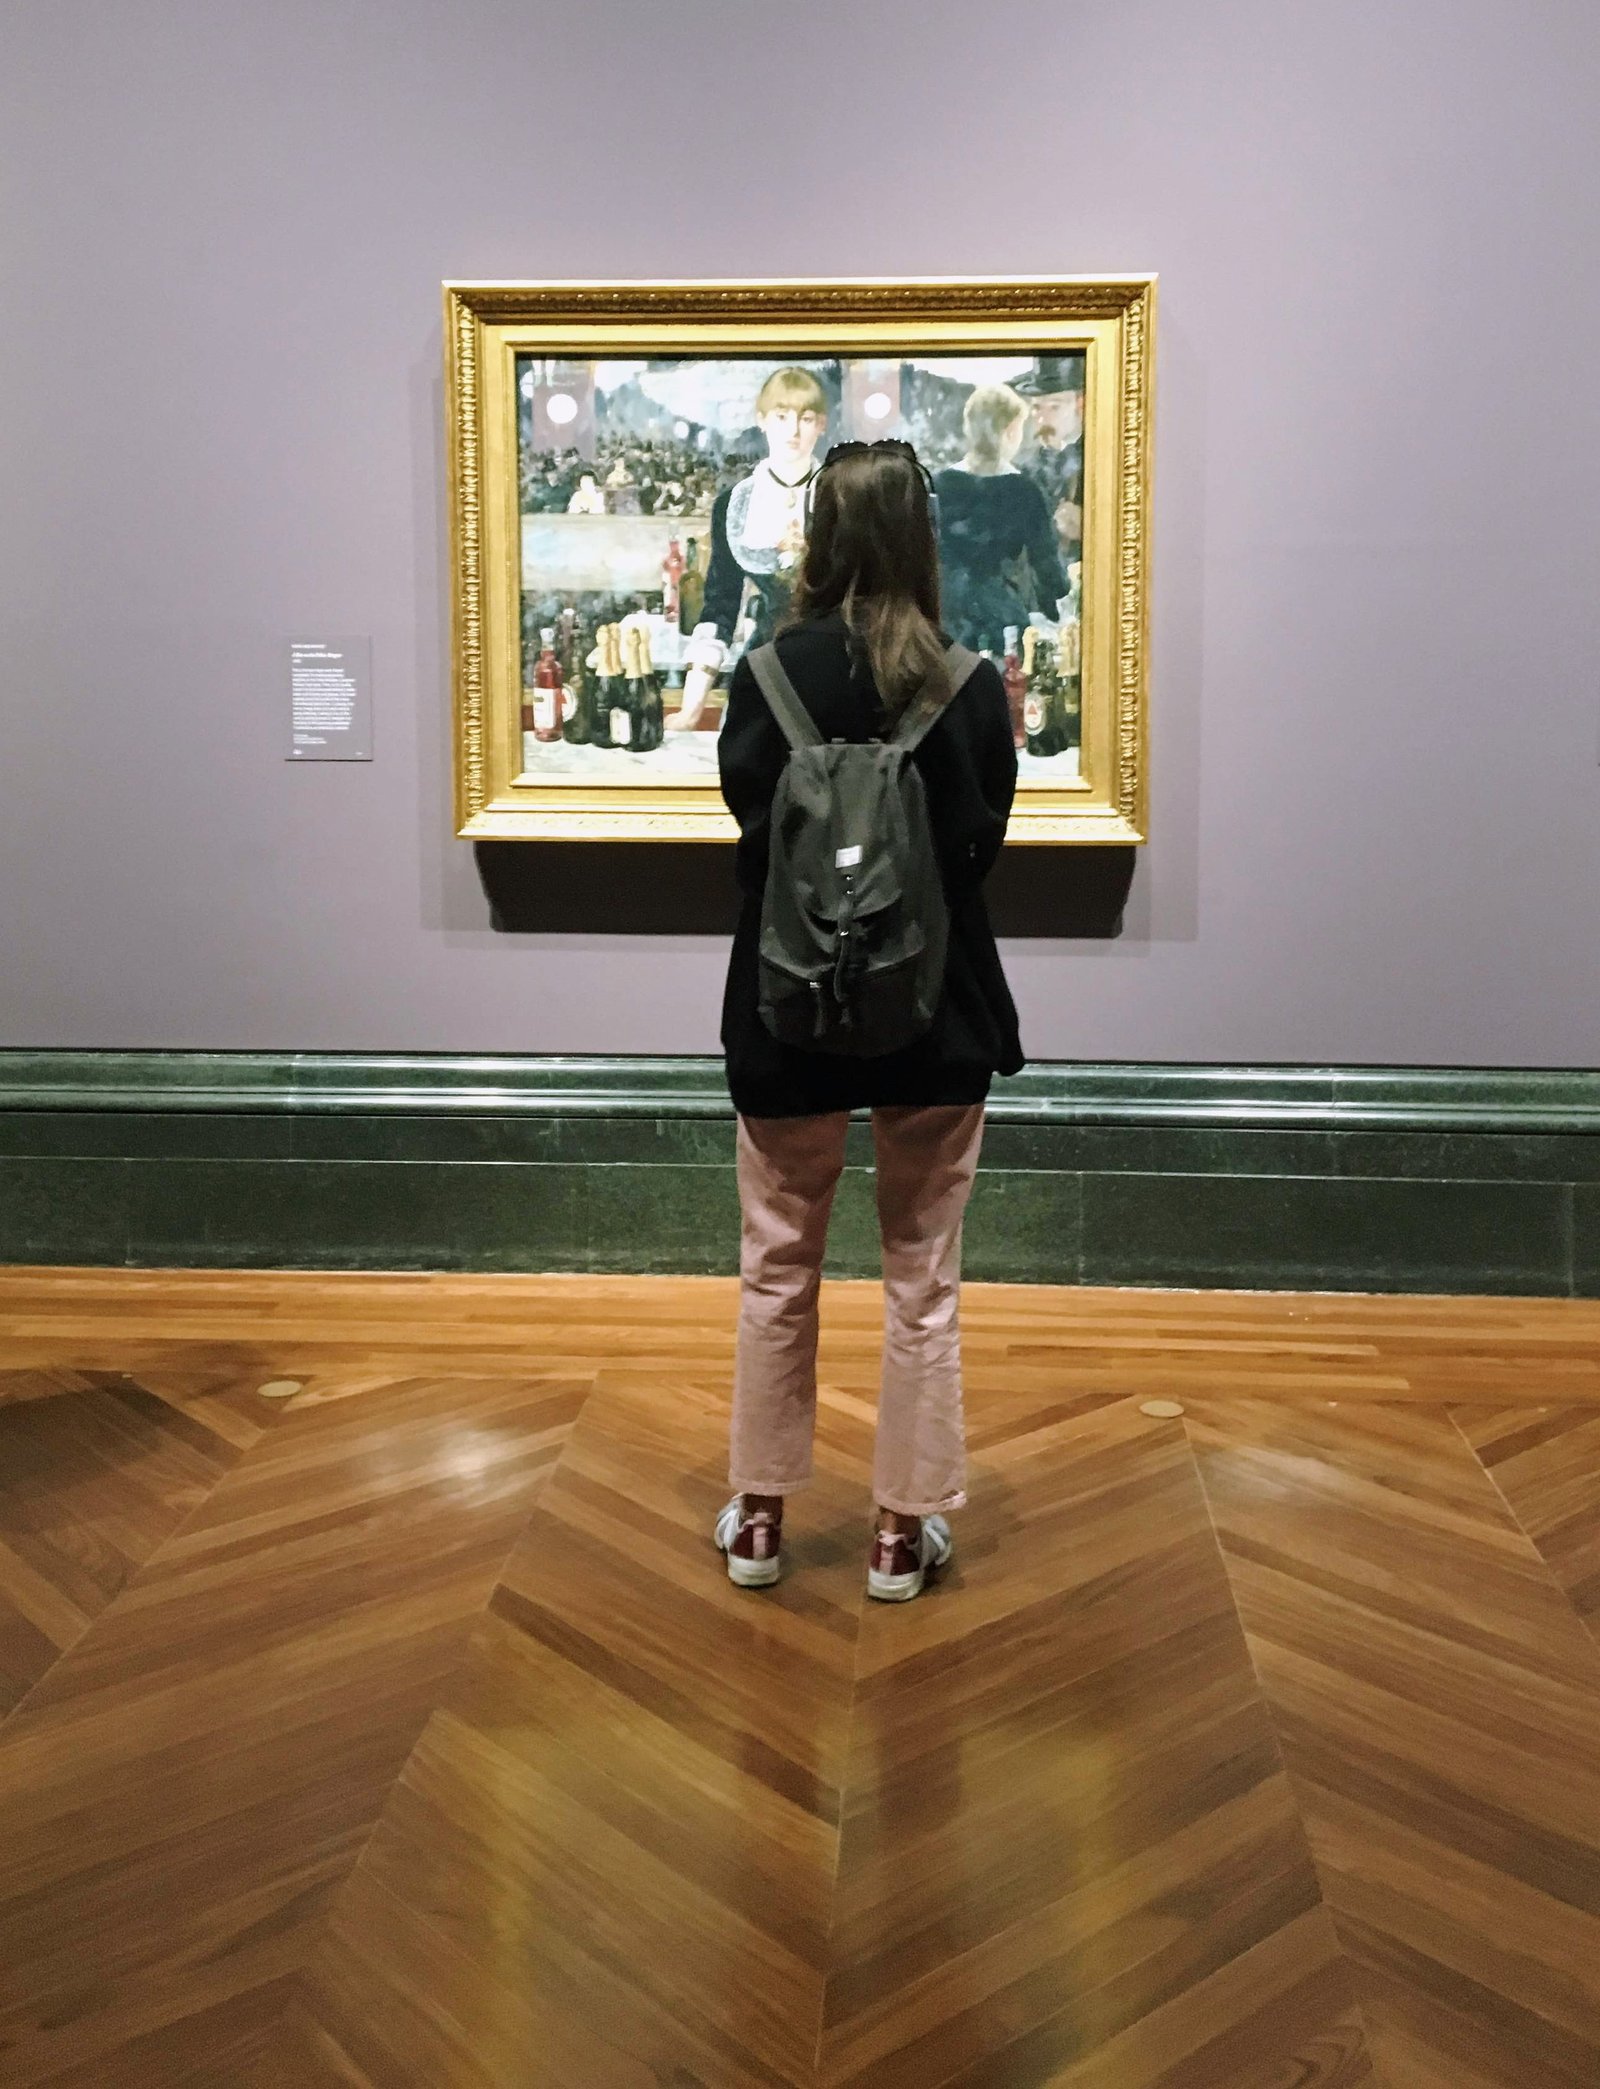 Courtauld Impressionists - National Gallery